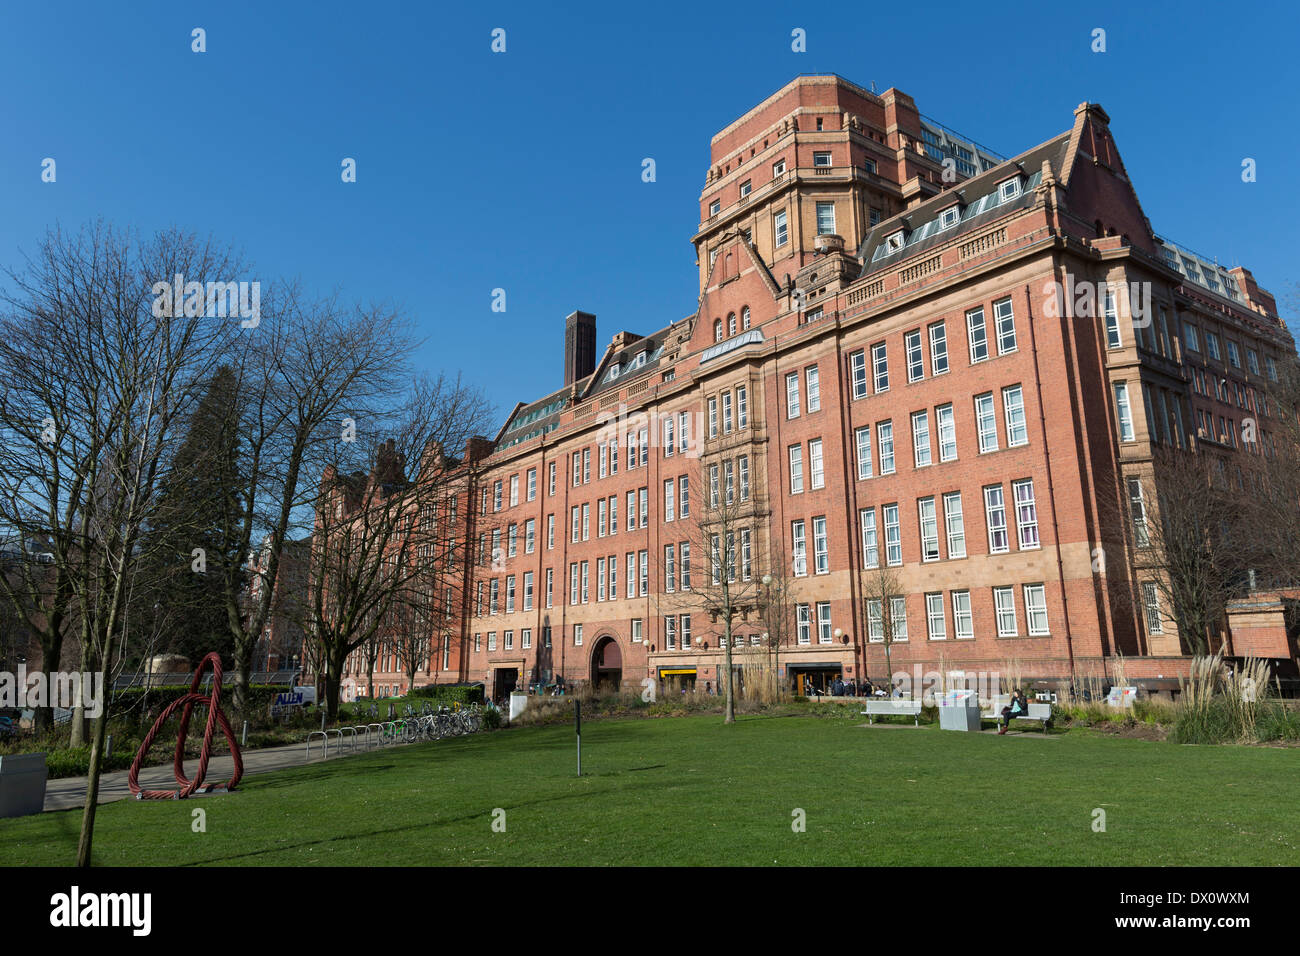 Sackville Street Building, part of The University of Manchester Stock Photo